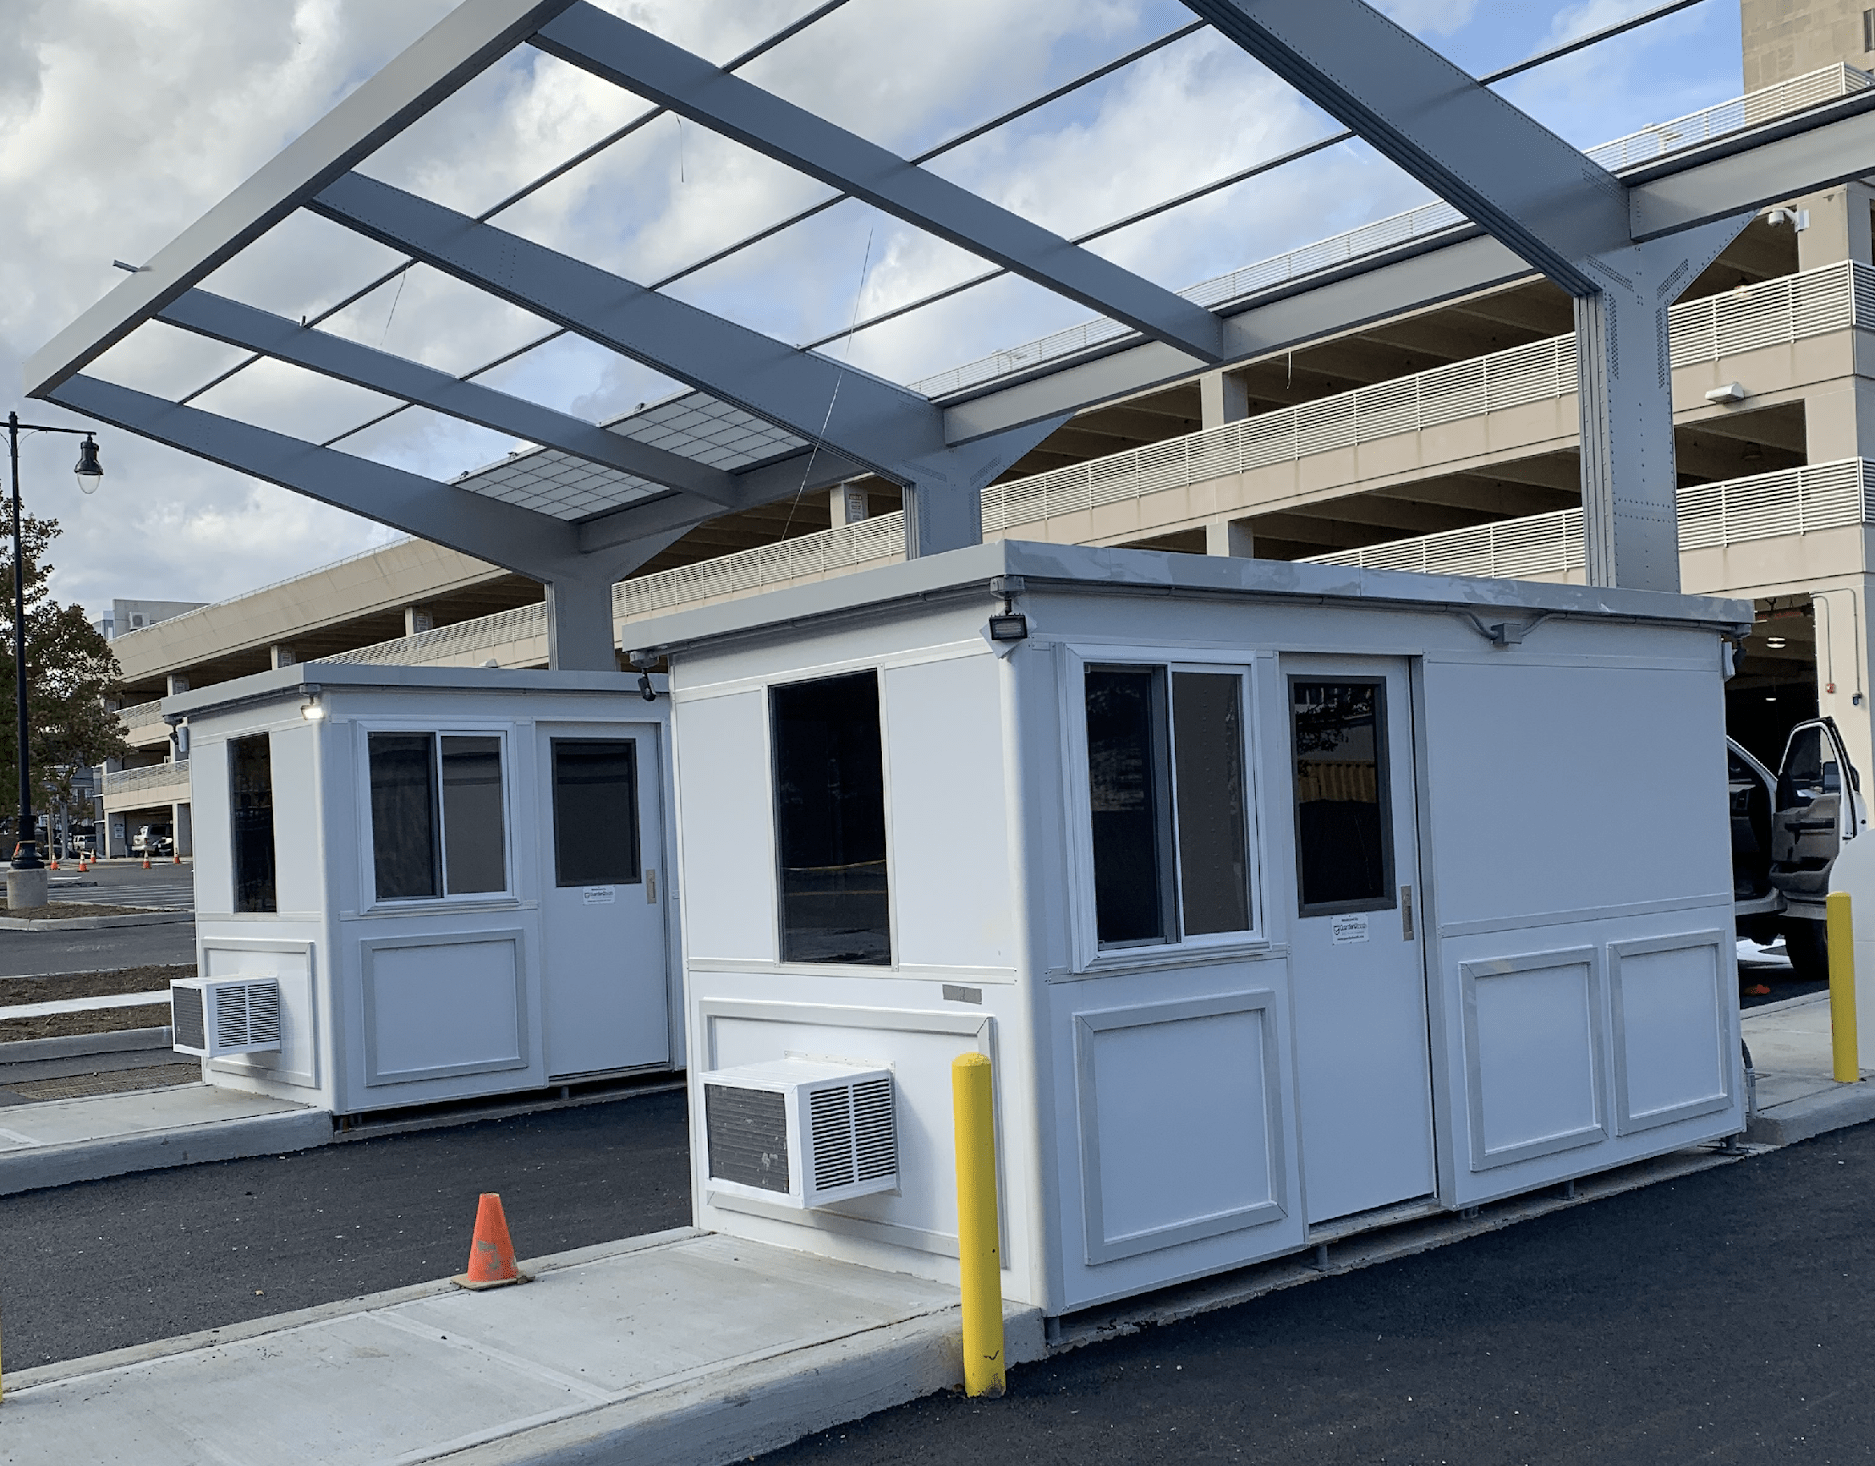 Prefabricated Guard Booths